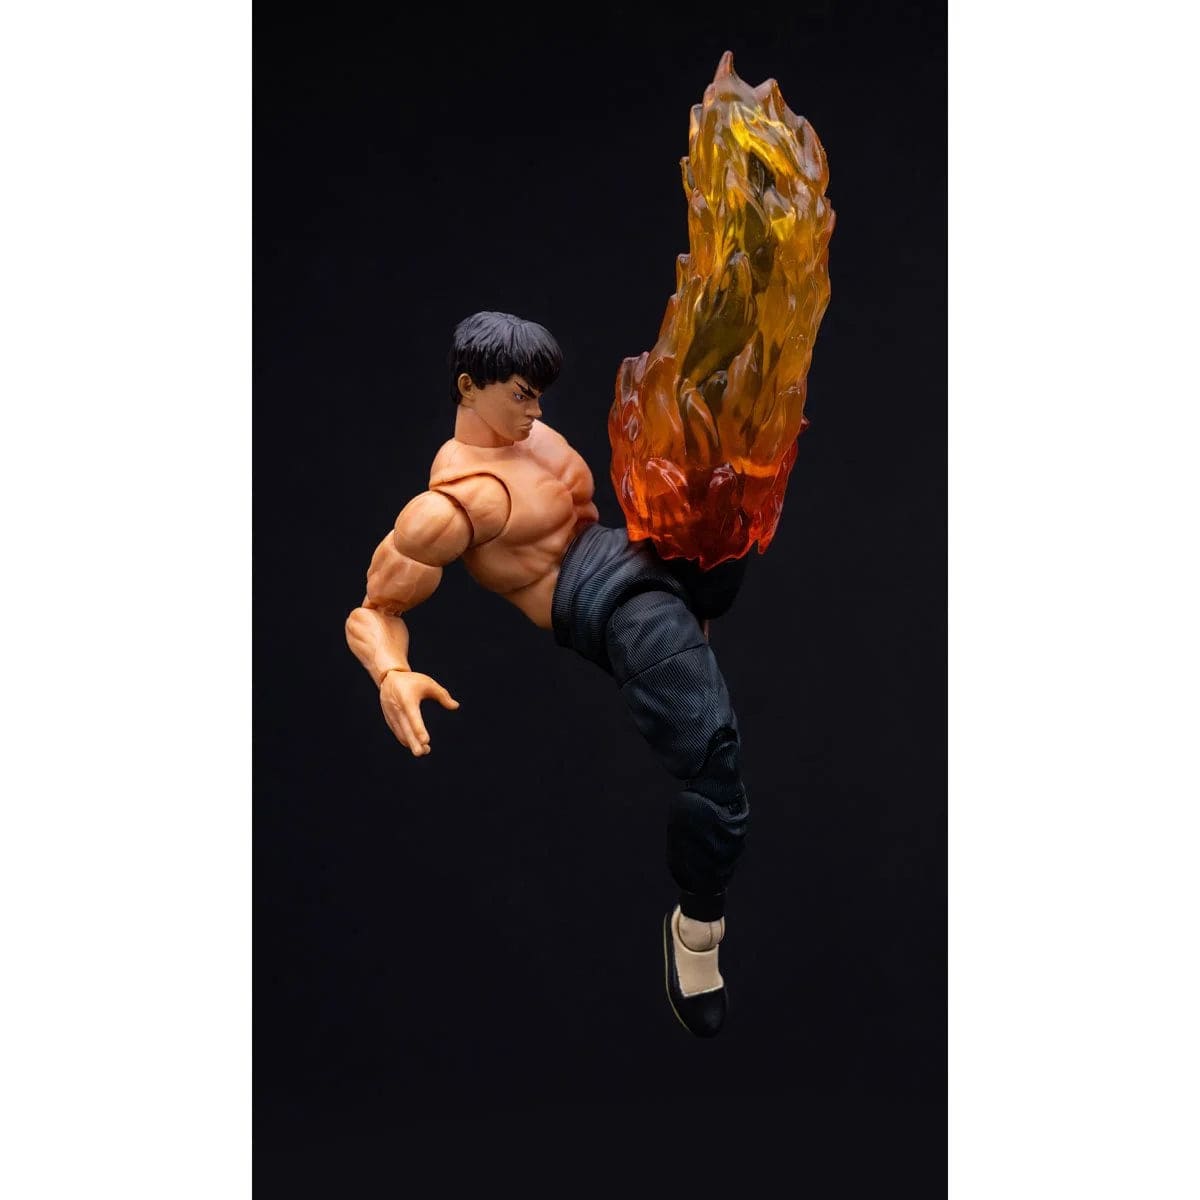 Storm Toys 1/12 Street Fighter V Akuma 6 inch Action Figure In